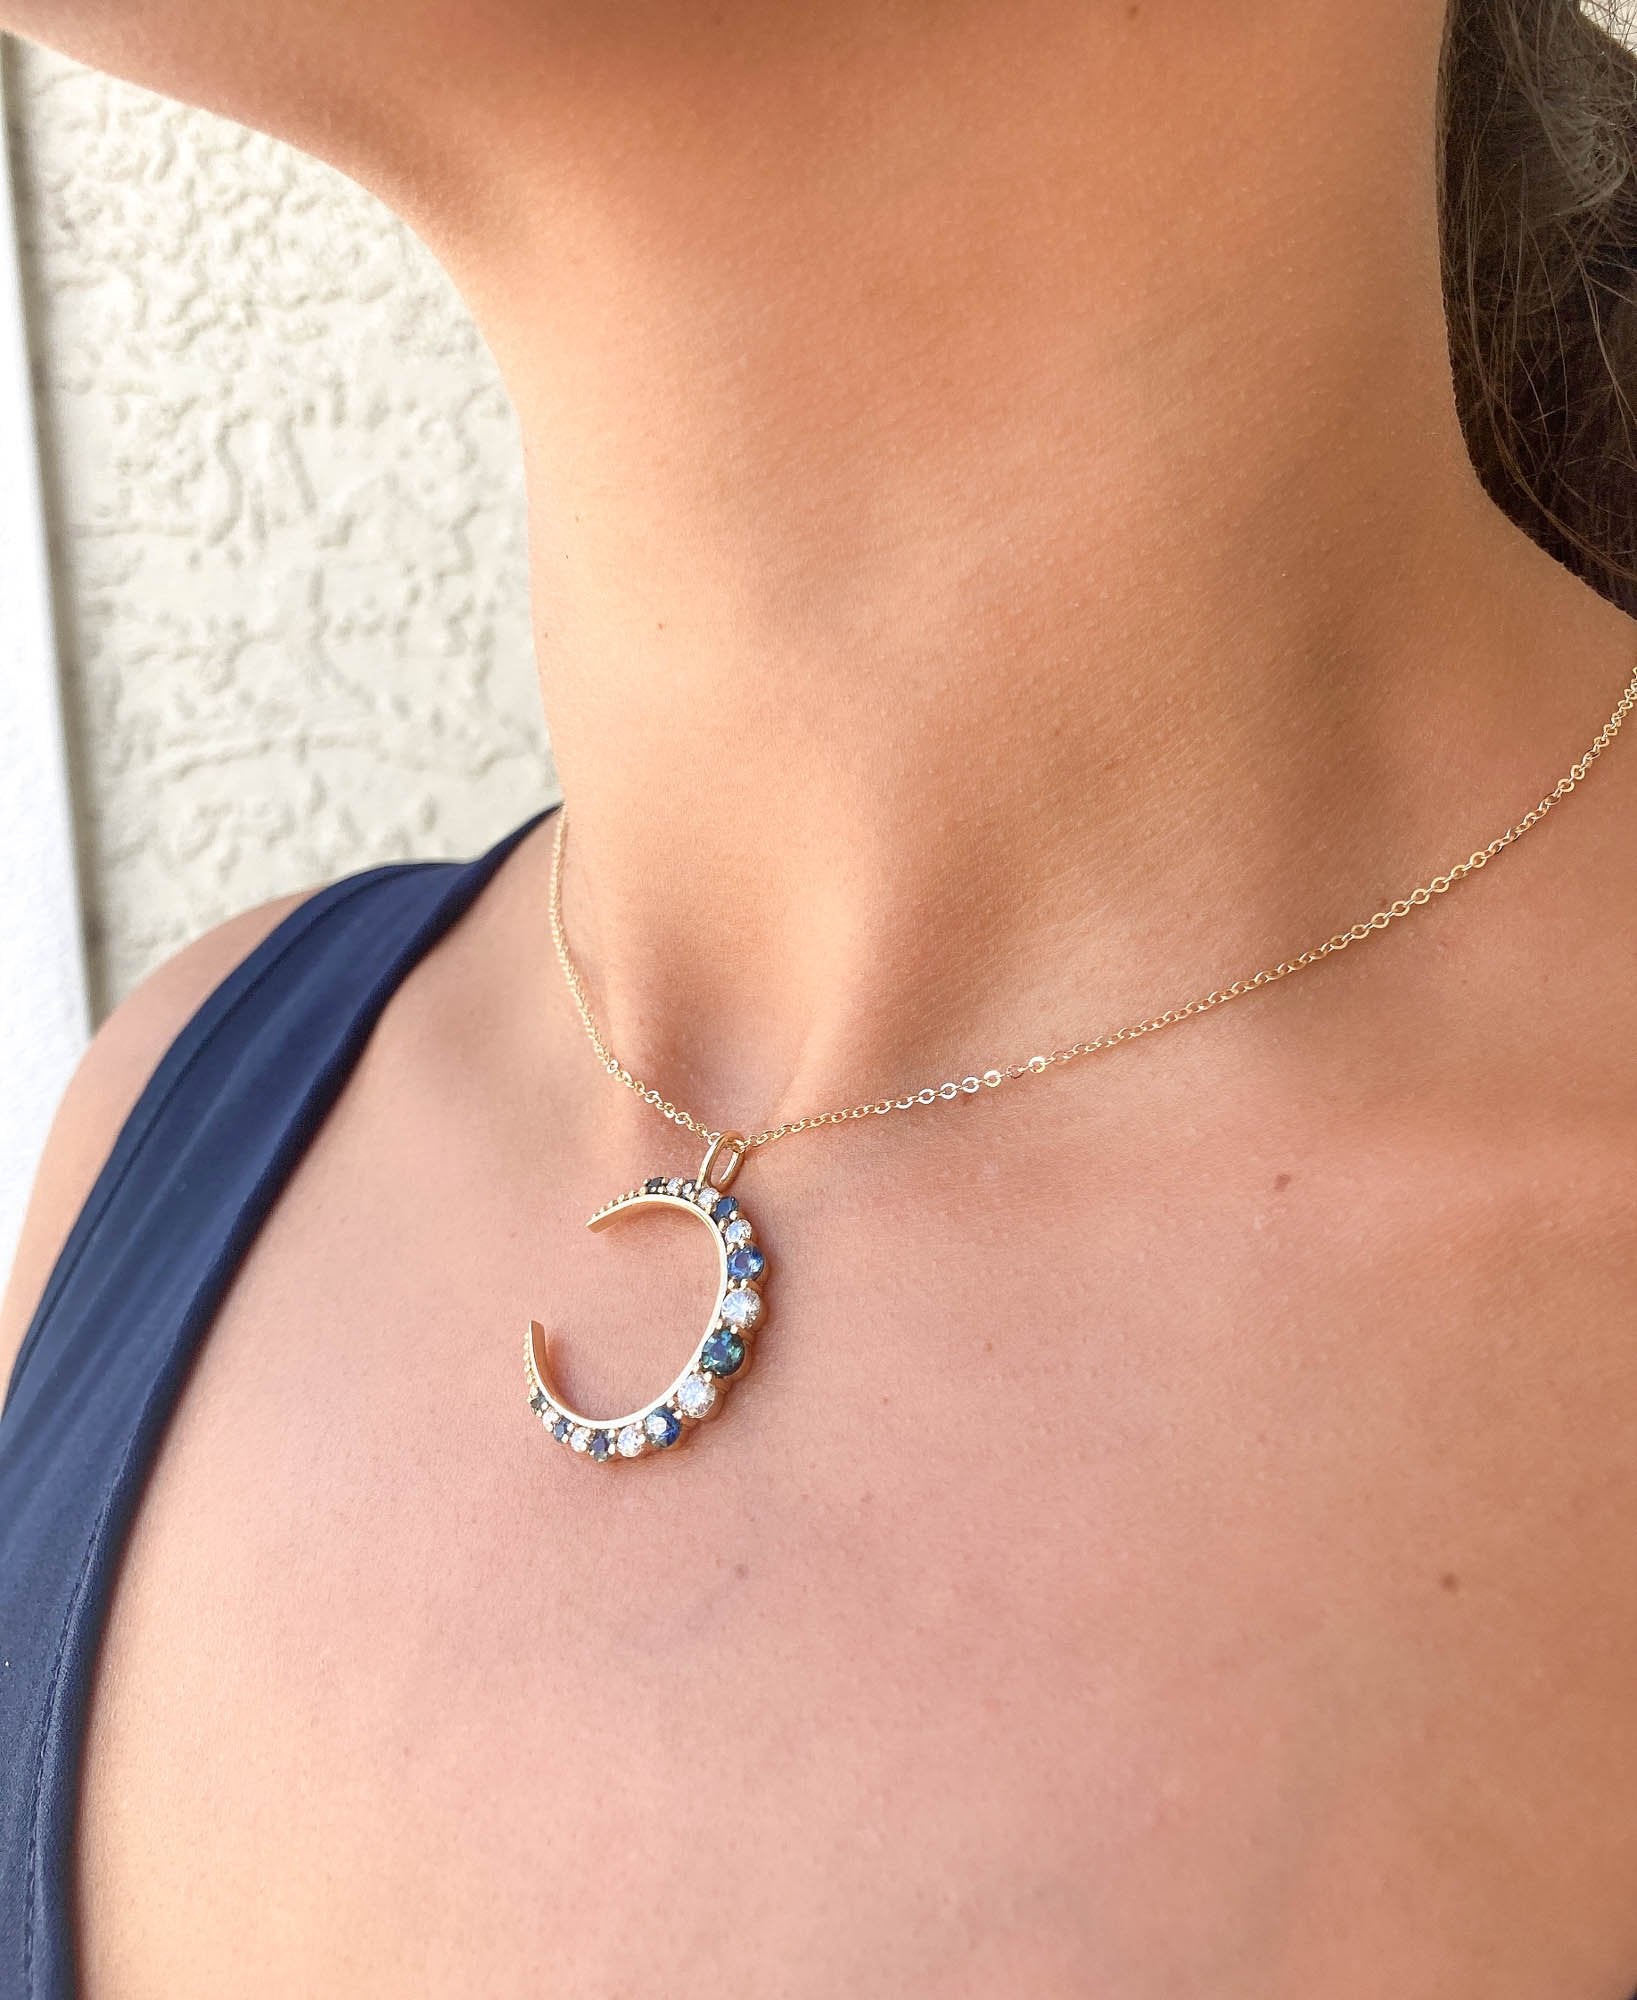 Buy Crescent Moon Necklace With Star, Sterling Silver Moon Necklace, Crescent  Moon Pendant, Gold Moon Necklace, Gift for Her Online in India - Etsy